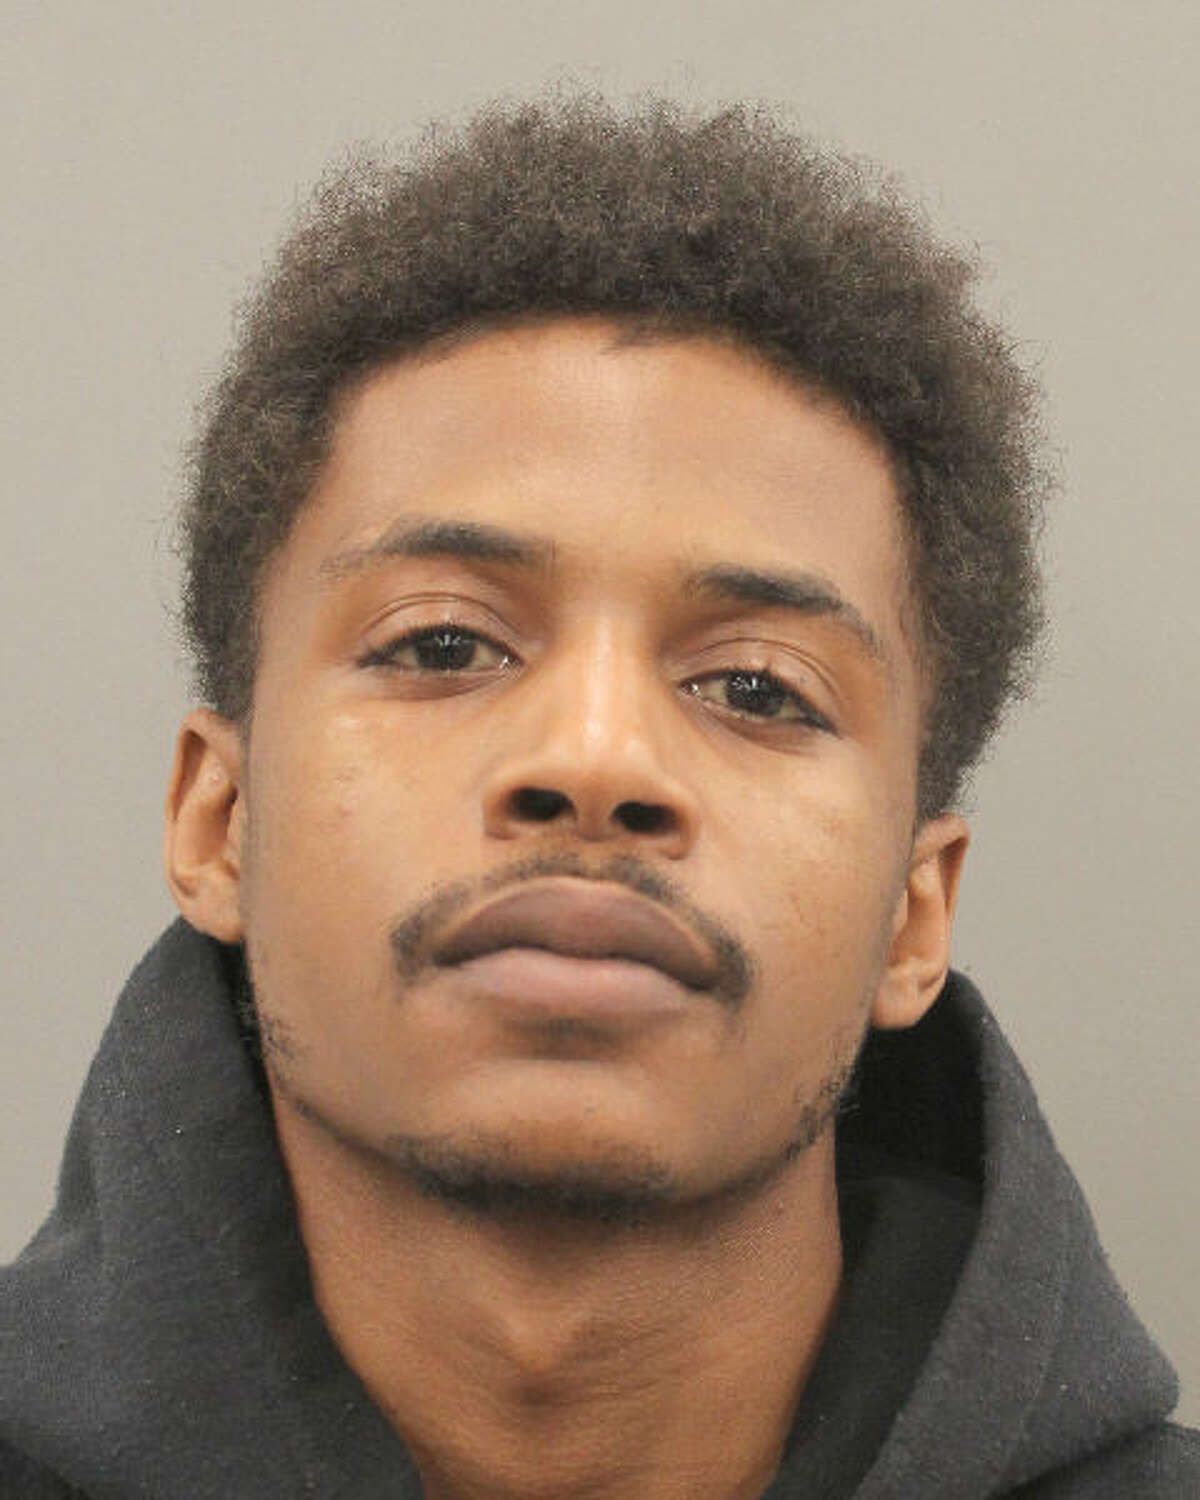 William Cooper, 22, has been charged with murder and aggravated assault with a deadly weapon. He is not yet in custody.